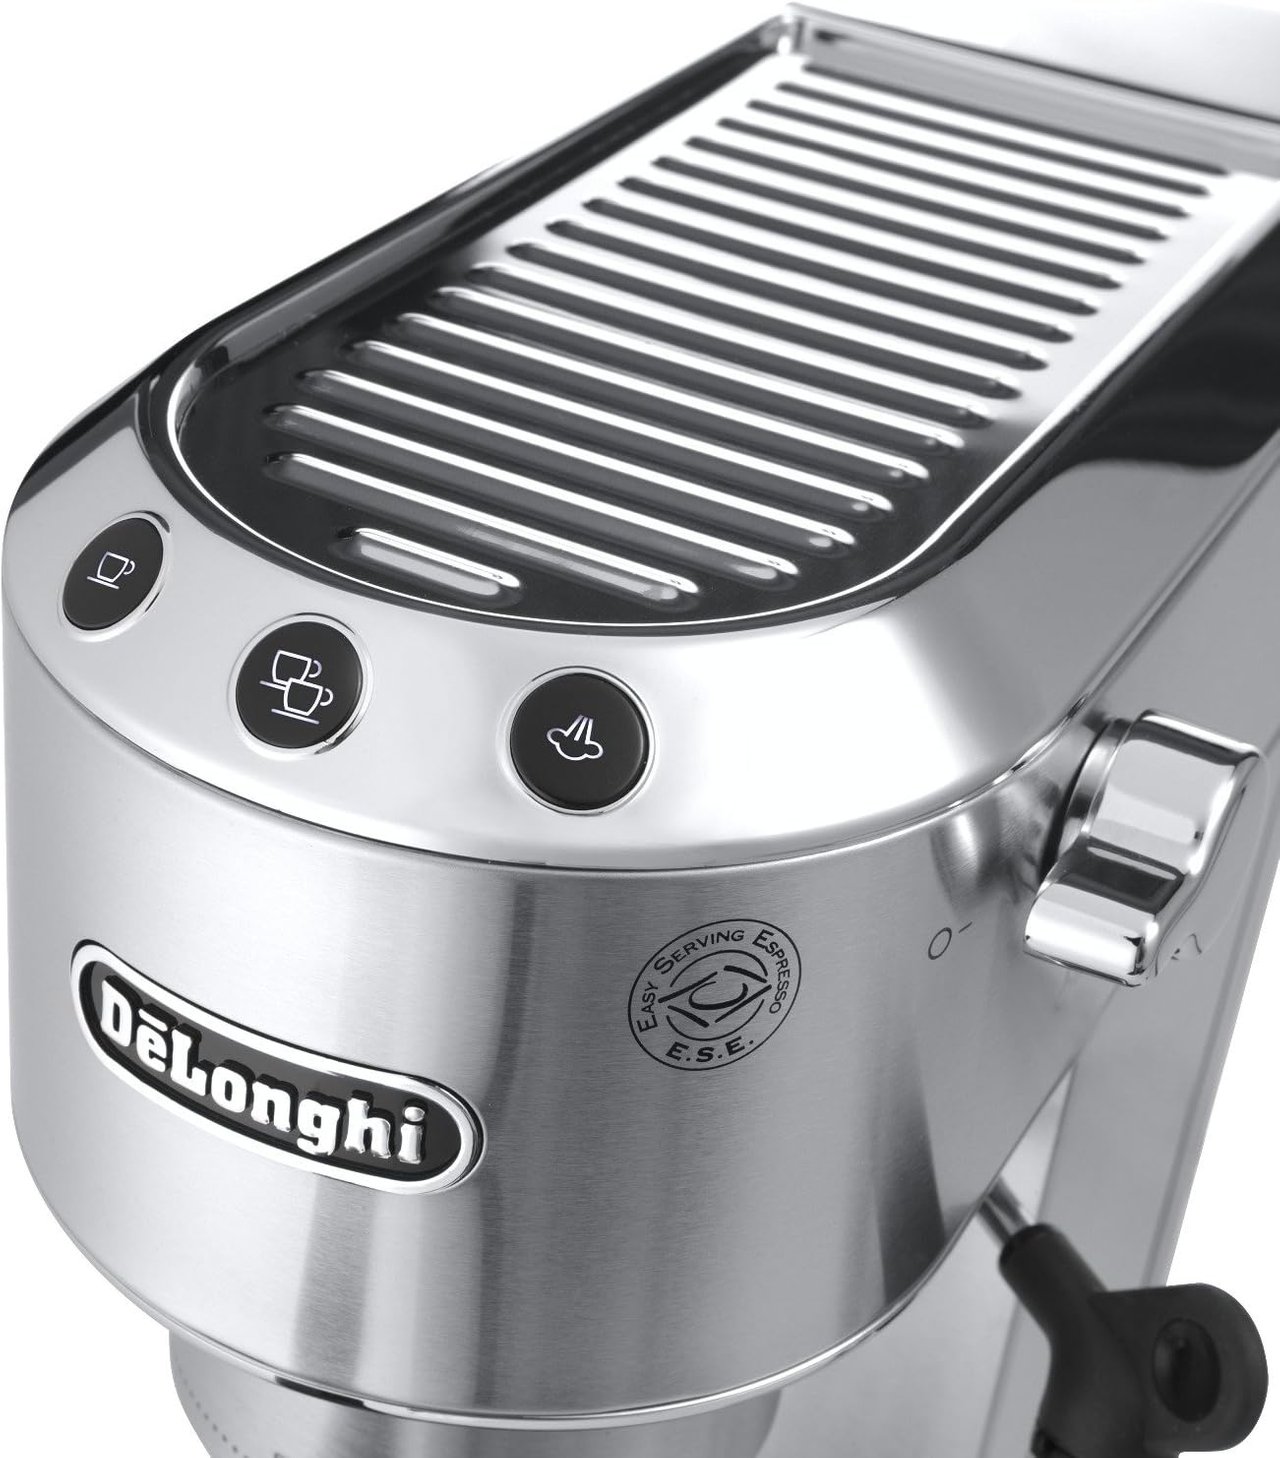 5 The De'Longhi EC680 Slim Stainless Steel Espresso and Cappuccino Machine with 15 Bar Pressure and Advanced Cappuccino System.